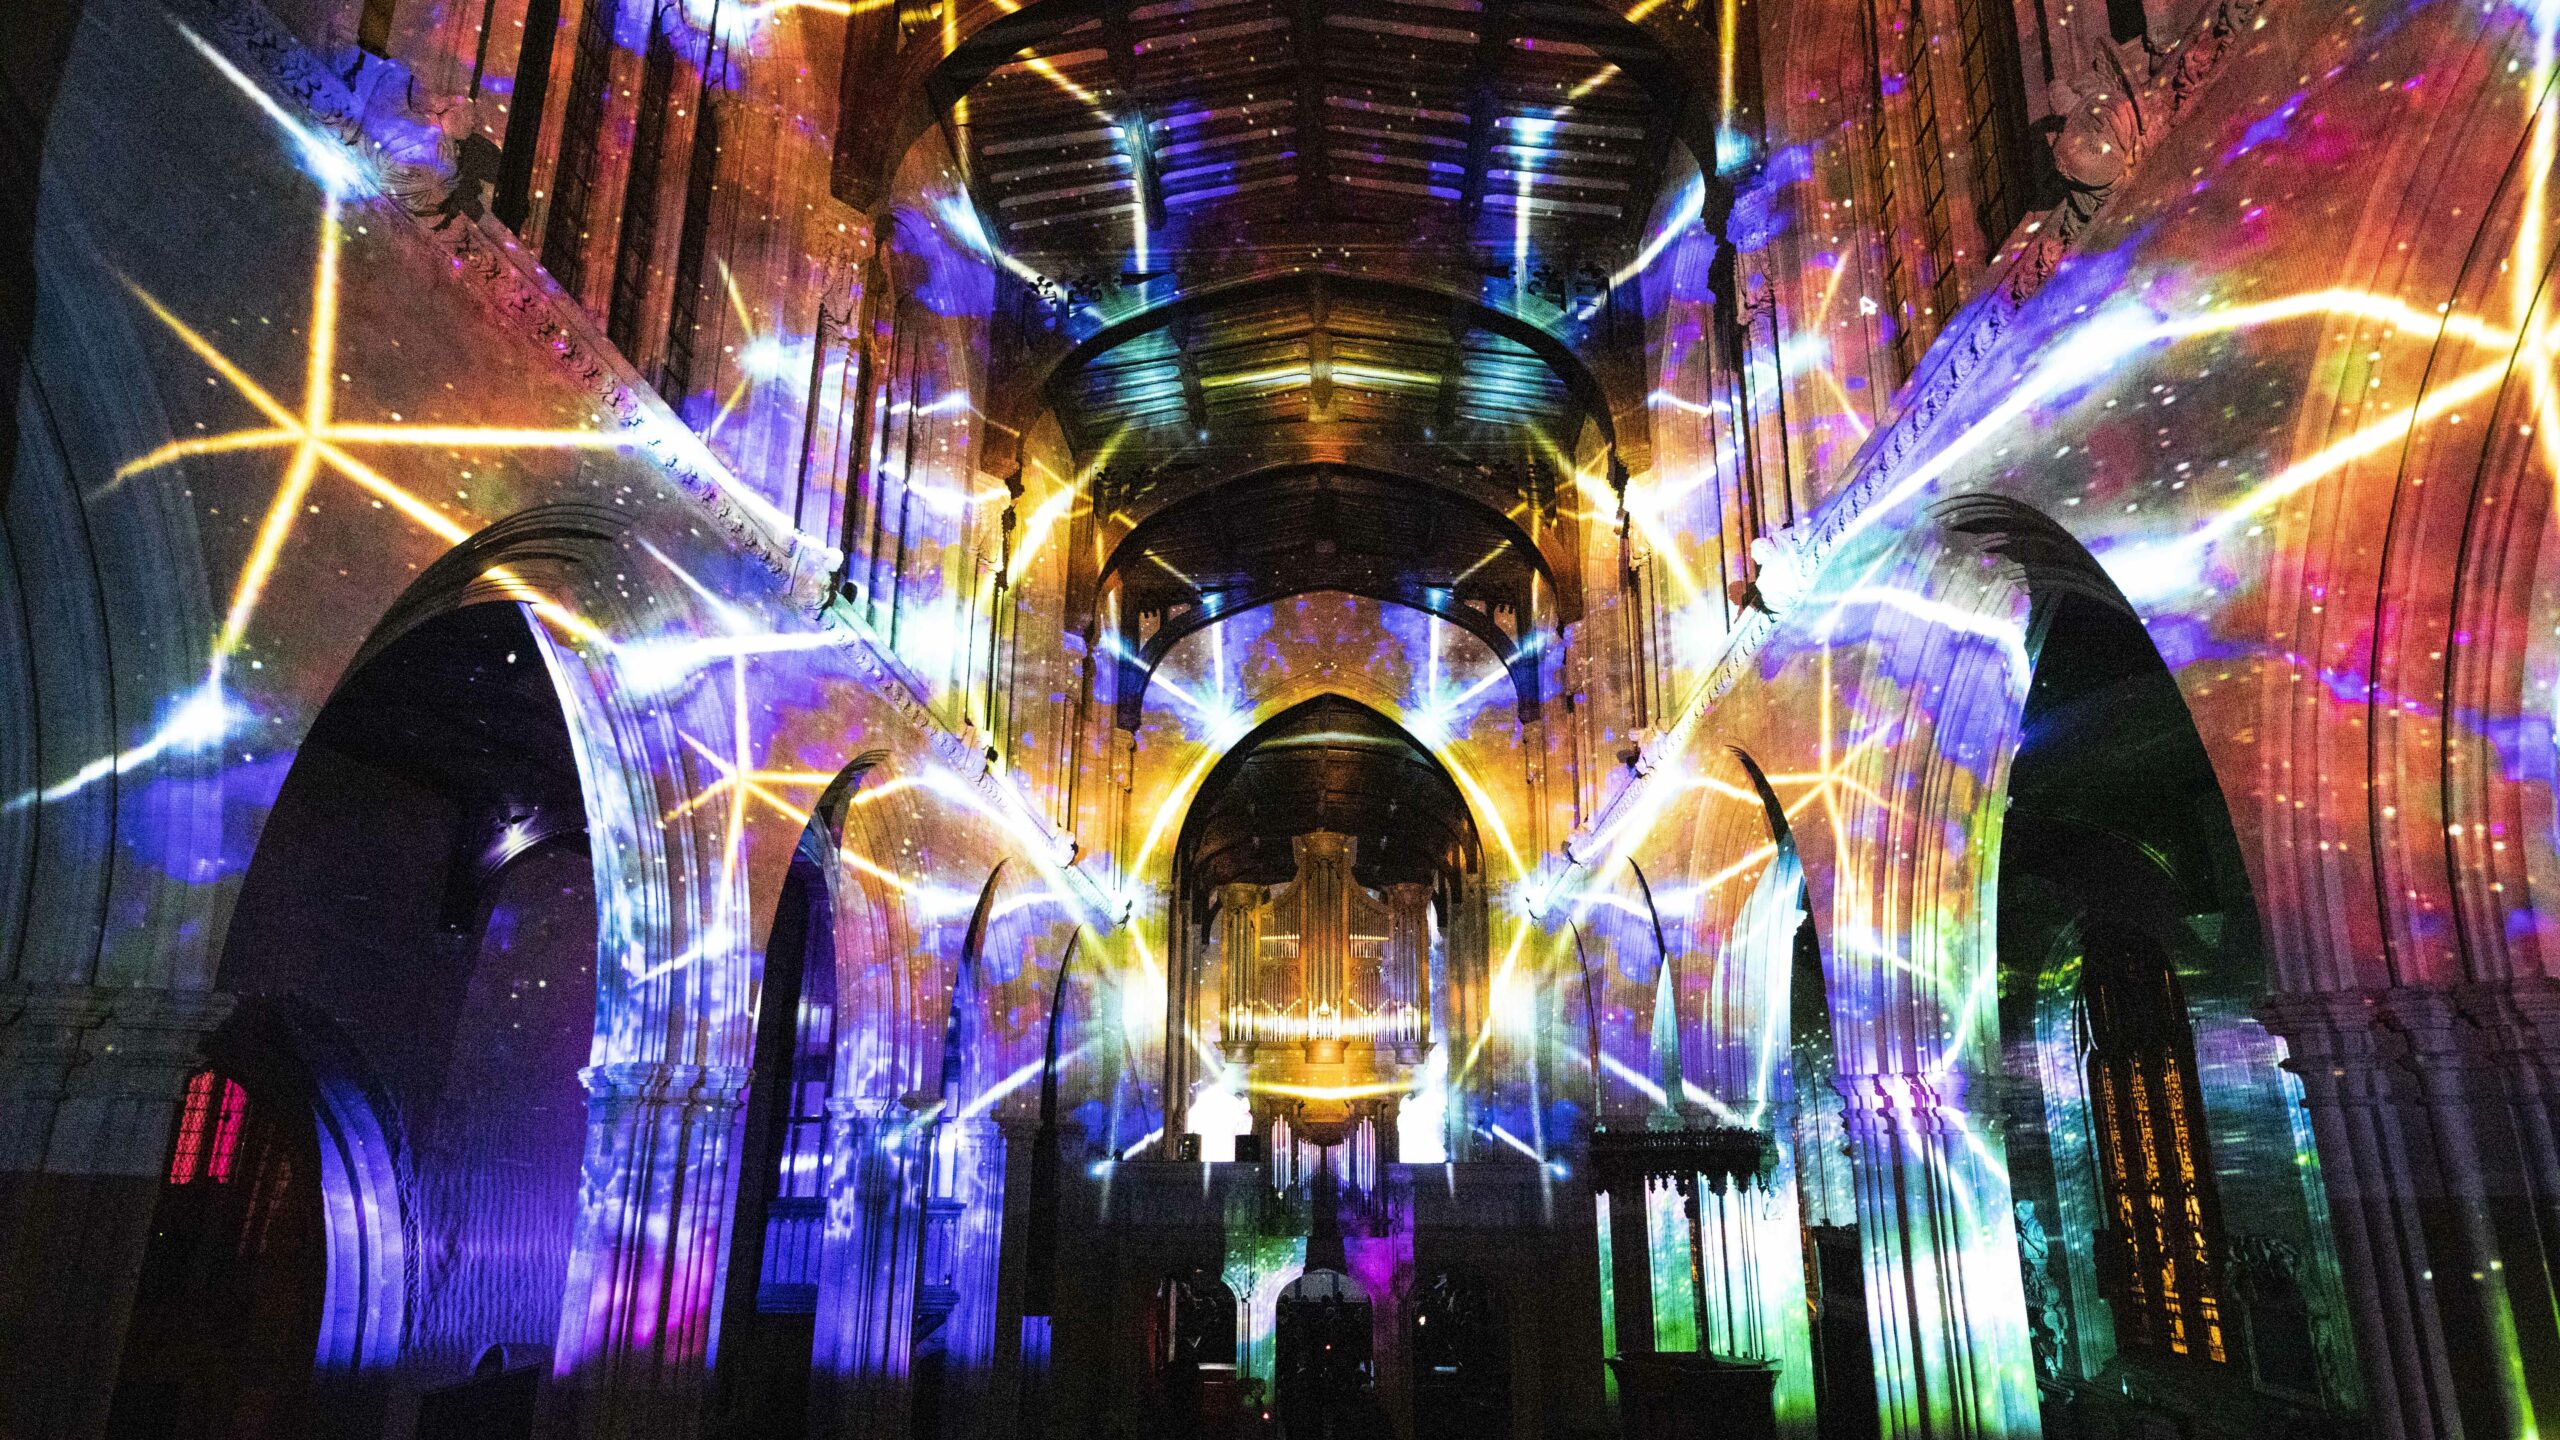 Chester Cathedral Discovery Light Display Copyright Luxmuralis.